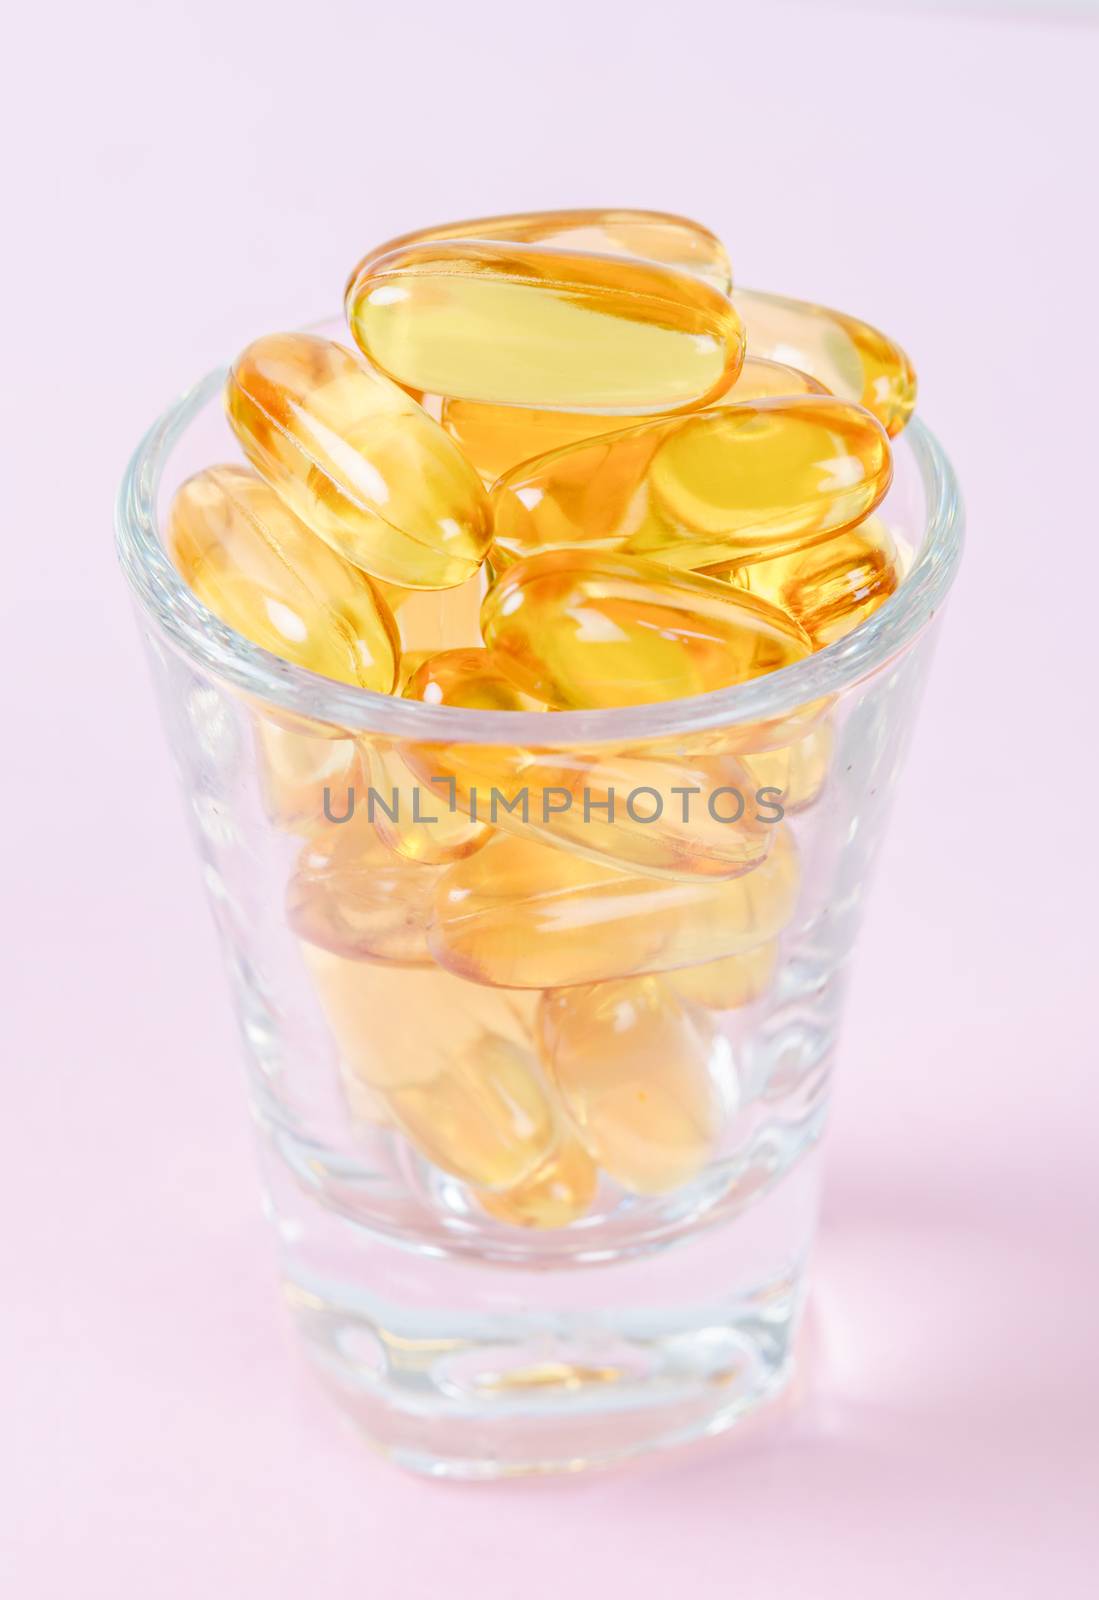 Fish oil capsules in glass. by Gamjai